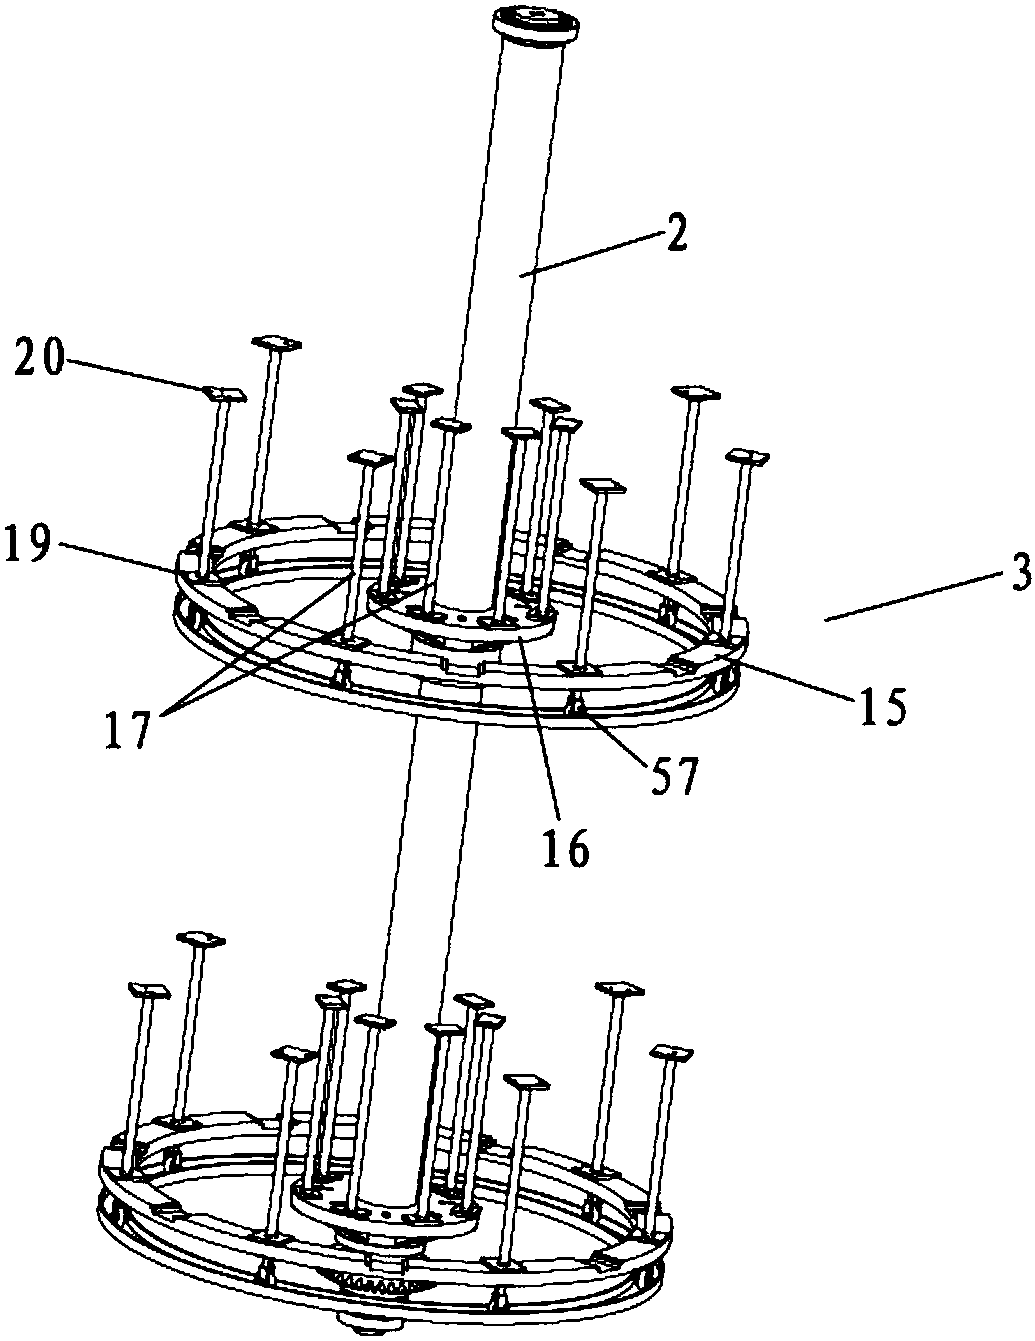 Staggered vertical-type bicycle parking device